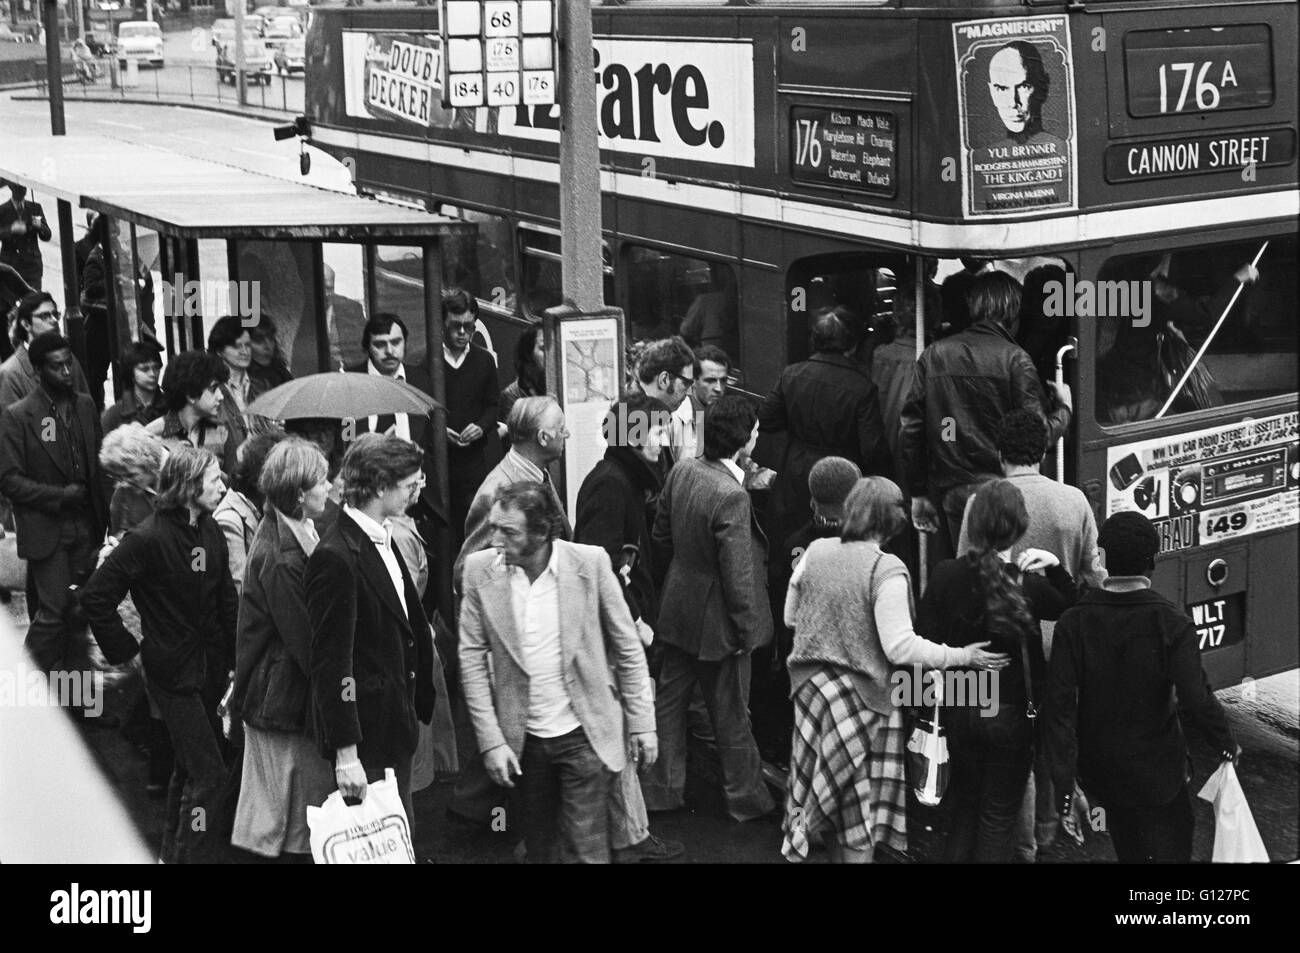 Archive image of a bus queue and no 176 bus arriving at a bus stop on a rainy day in Lambeth, London, England 1979 Stock Photo